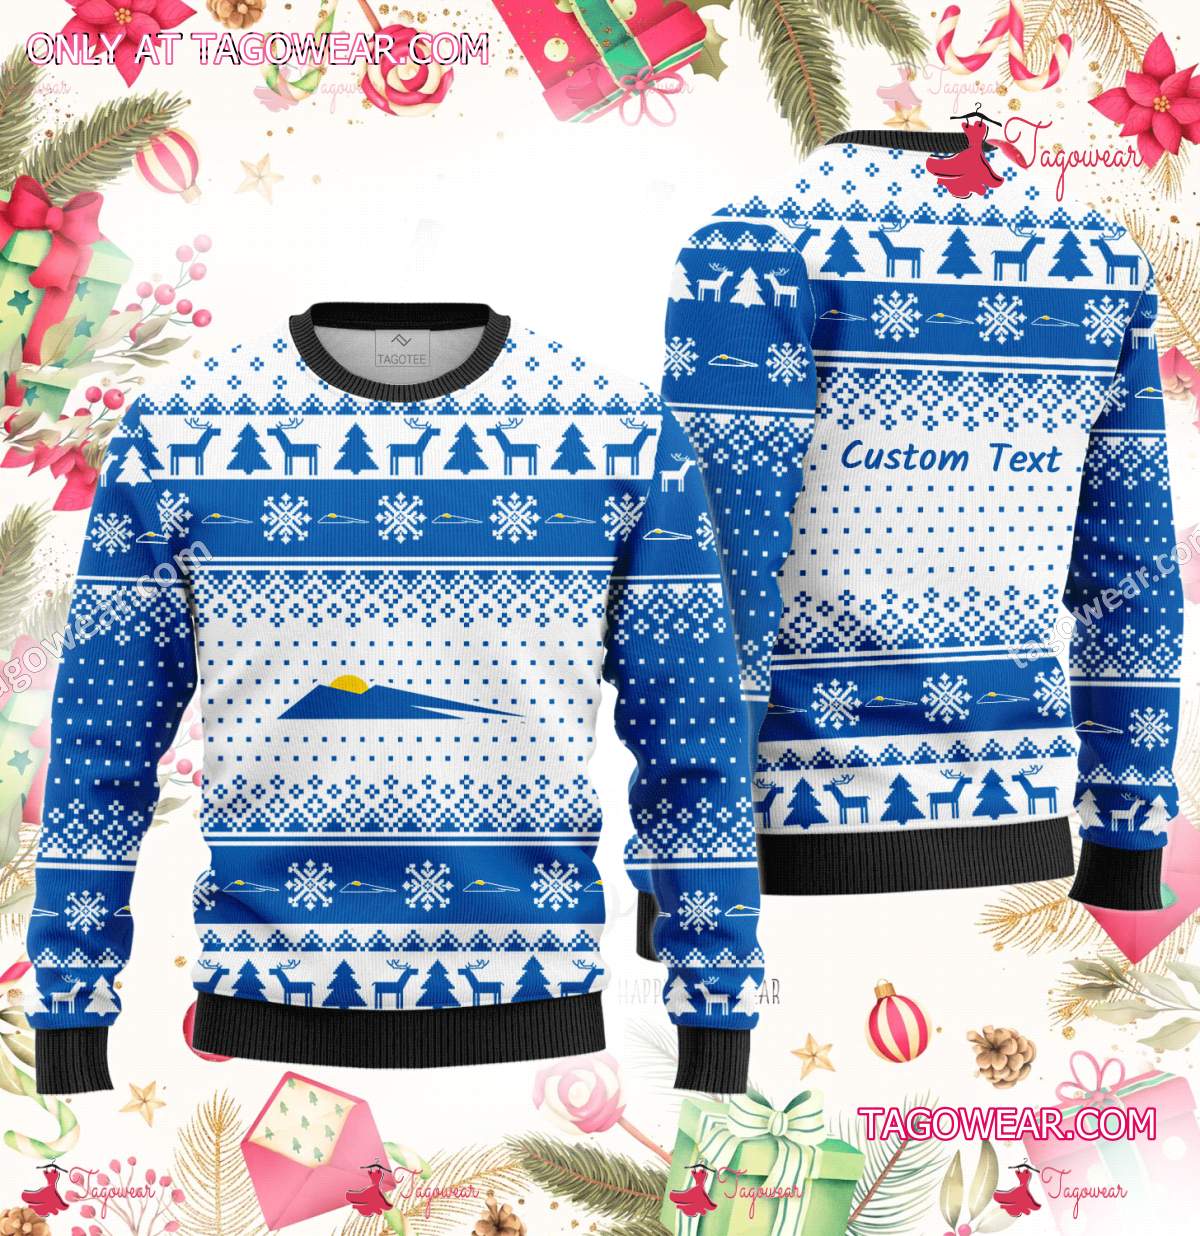 Suncrest Bank Ugly Christmas Sweater - Tagowear